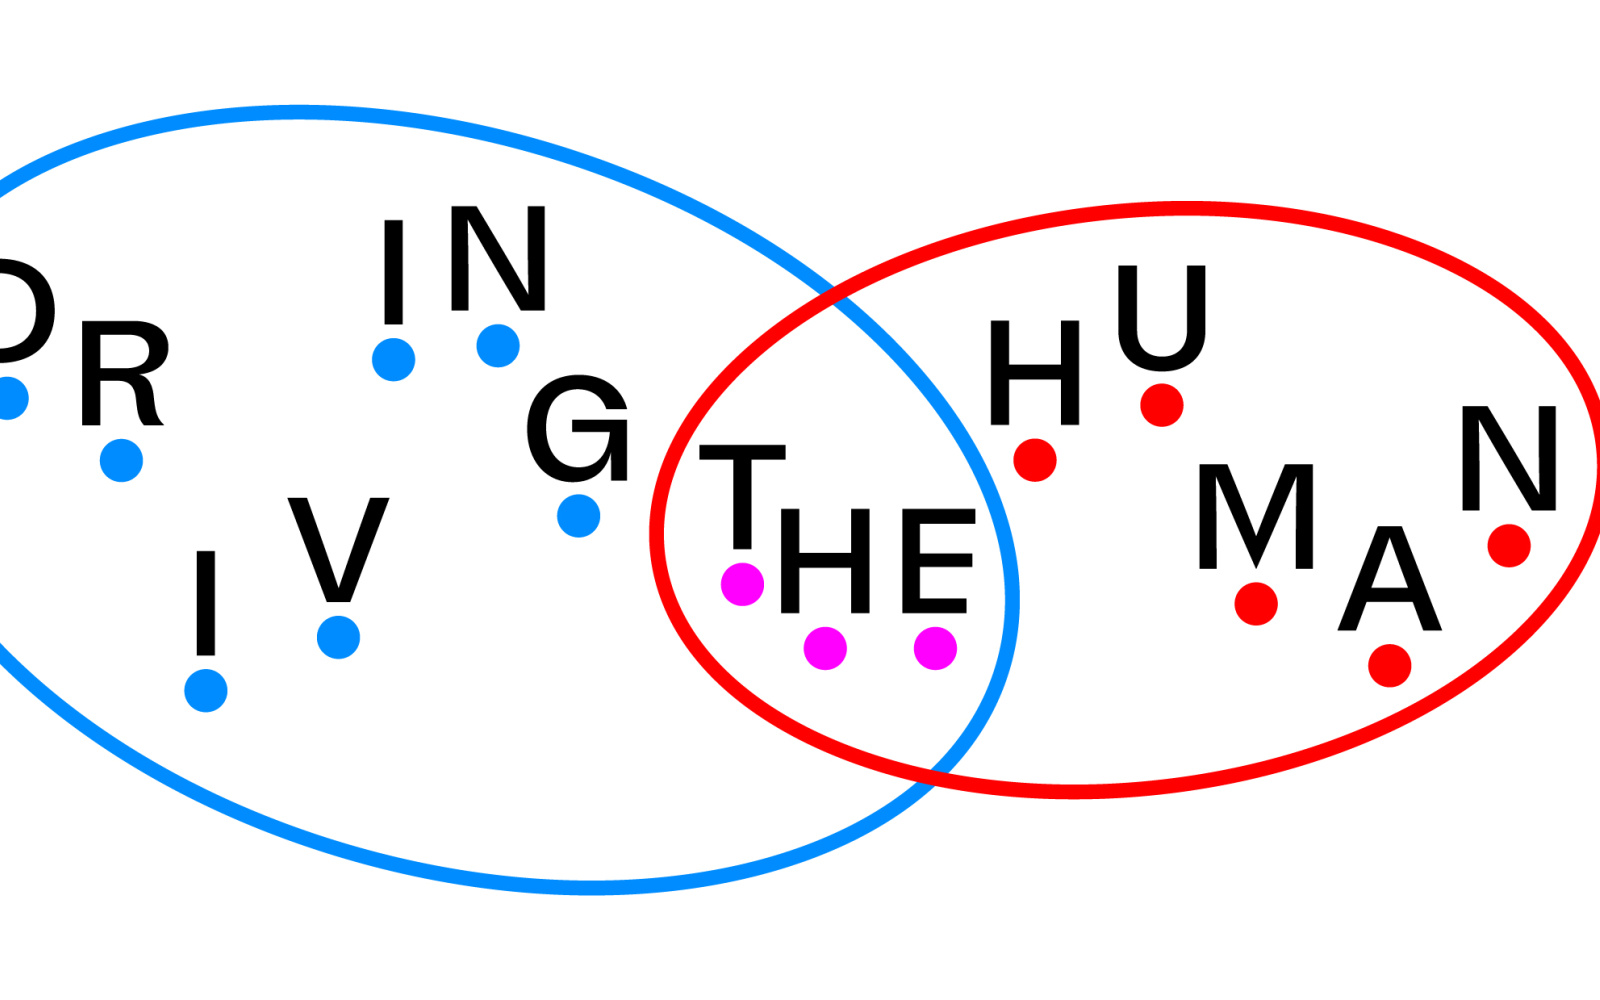 Two circles intersect. The left circle says "Driving", the left circle says "Human" and the intersection carries "The". All letters are located on individual points.